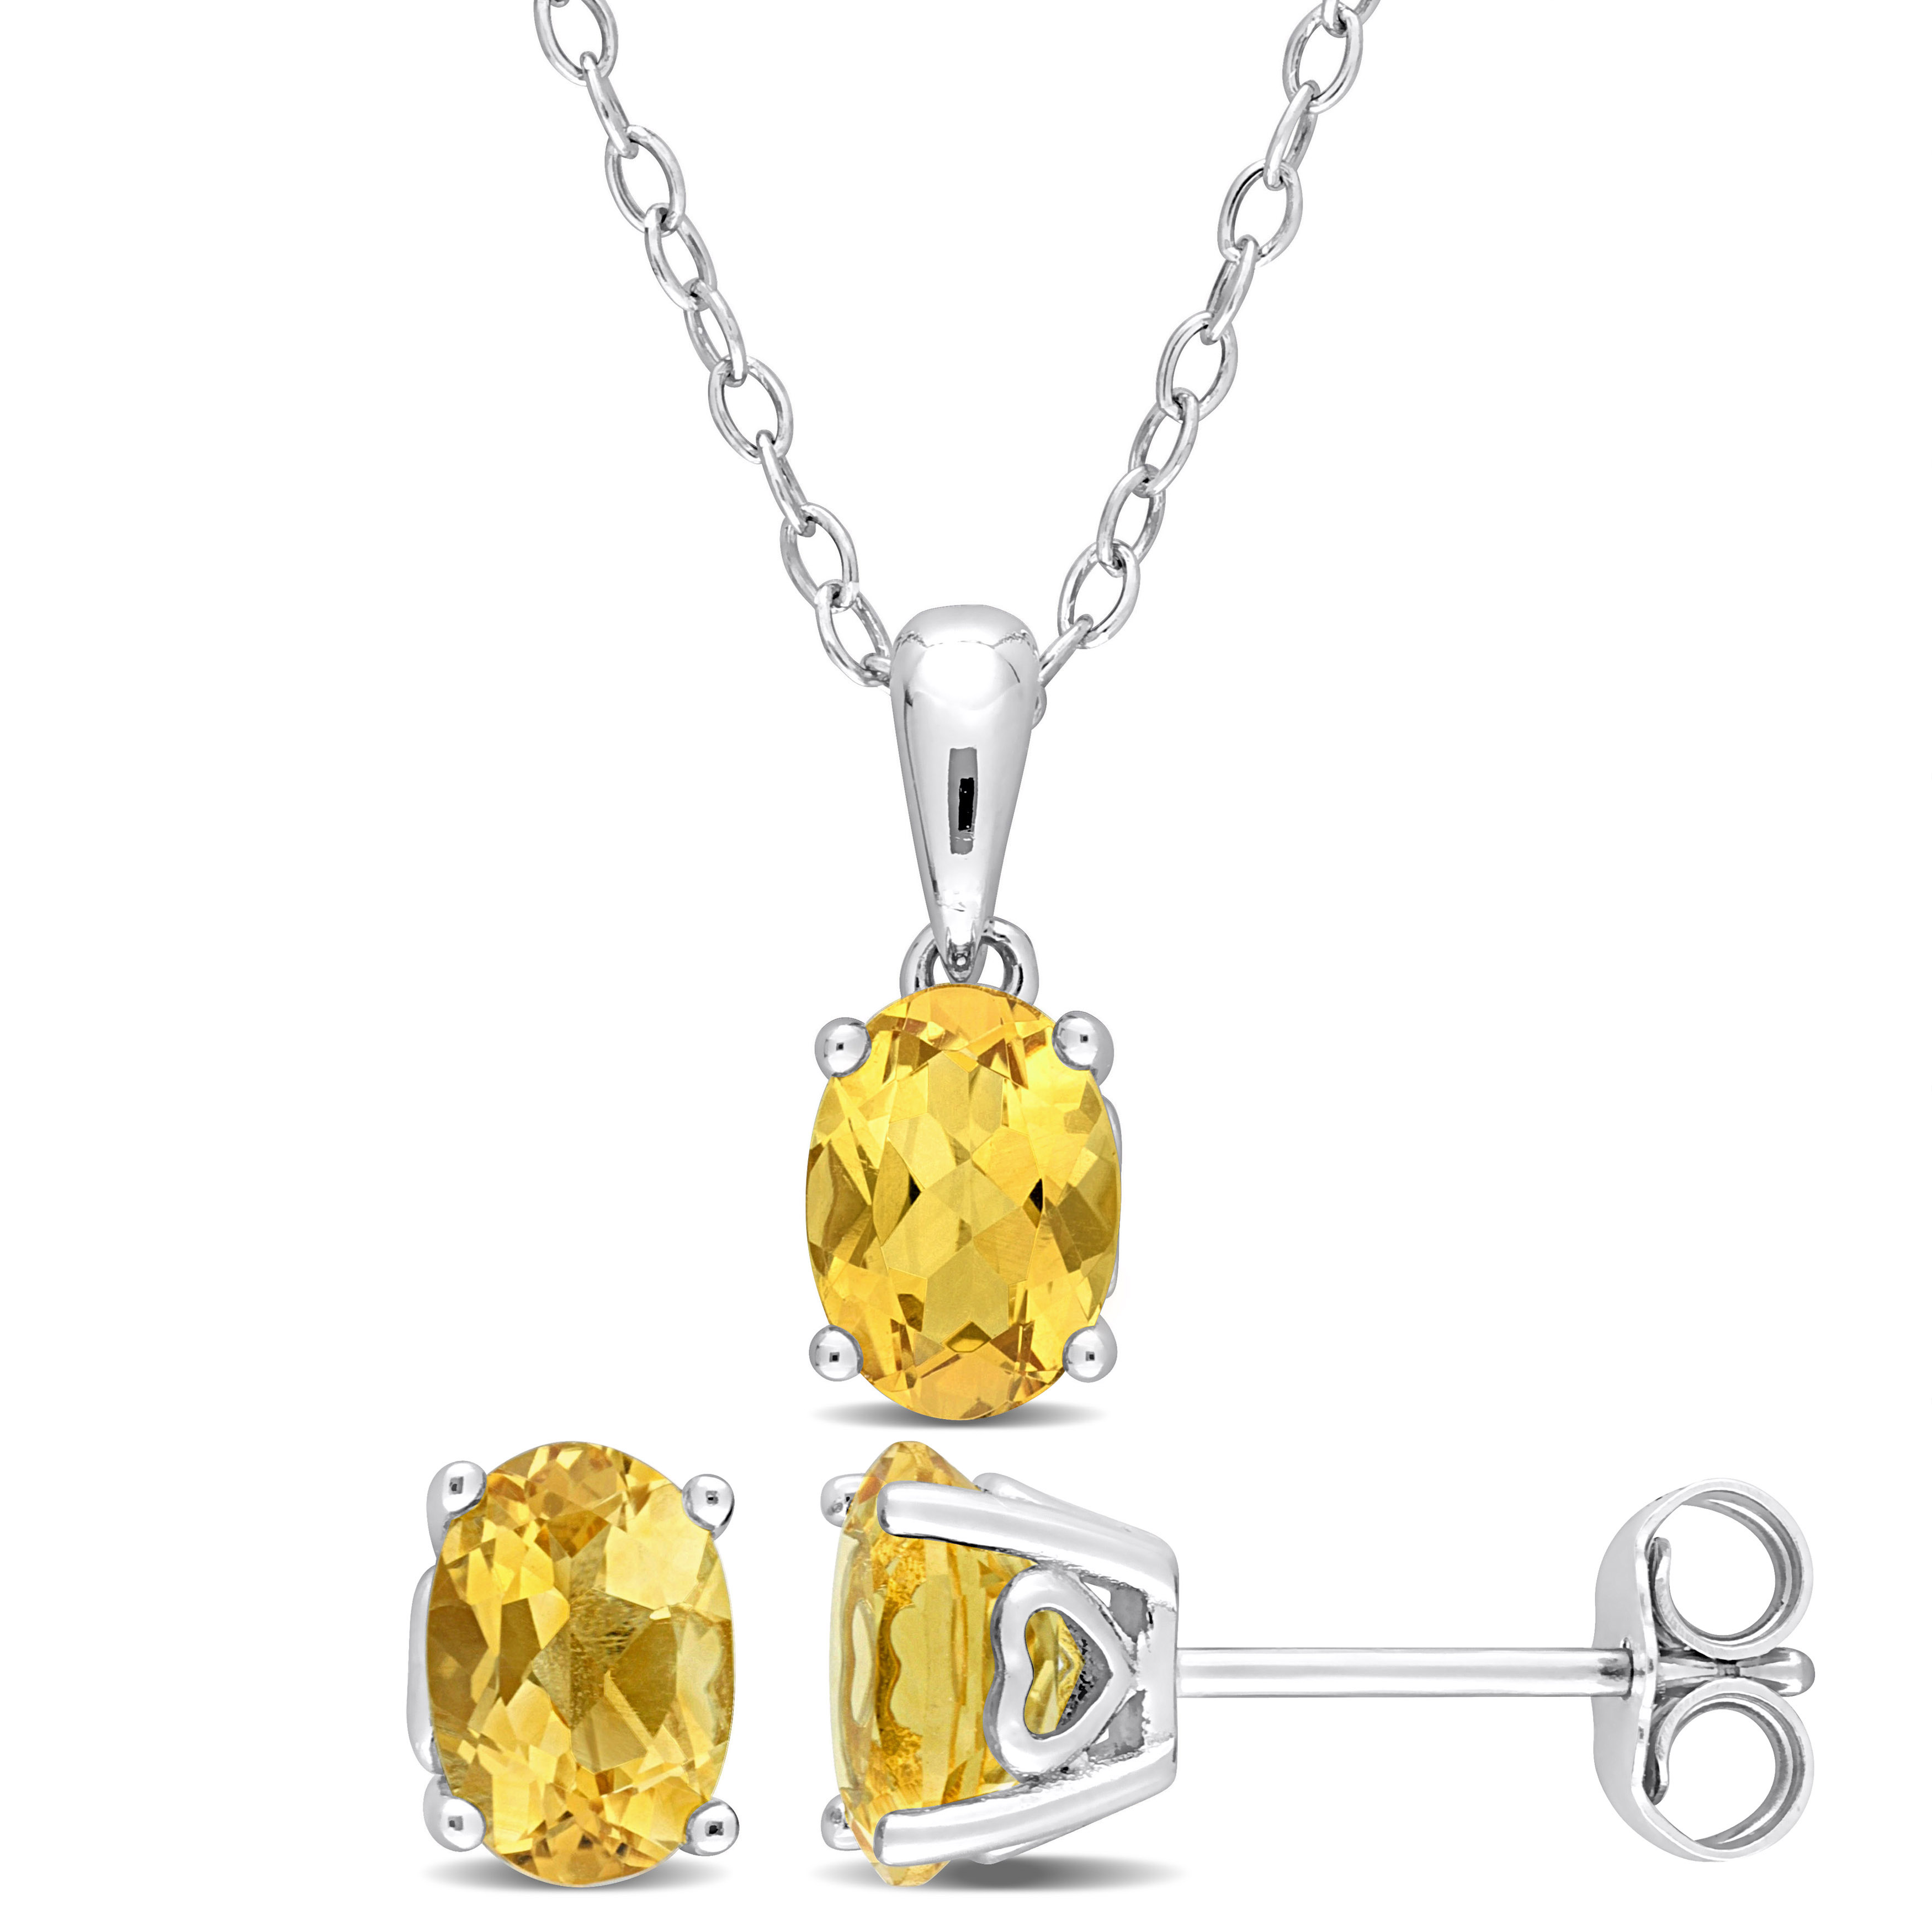 2 1/10 CT TGW Oval Citrine 2-Piece Solitaire Pendant with Chain and Stud Earrings Set in Sterling Silver